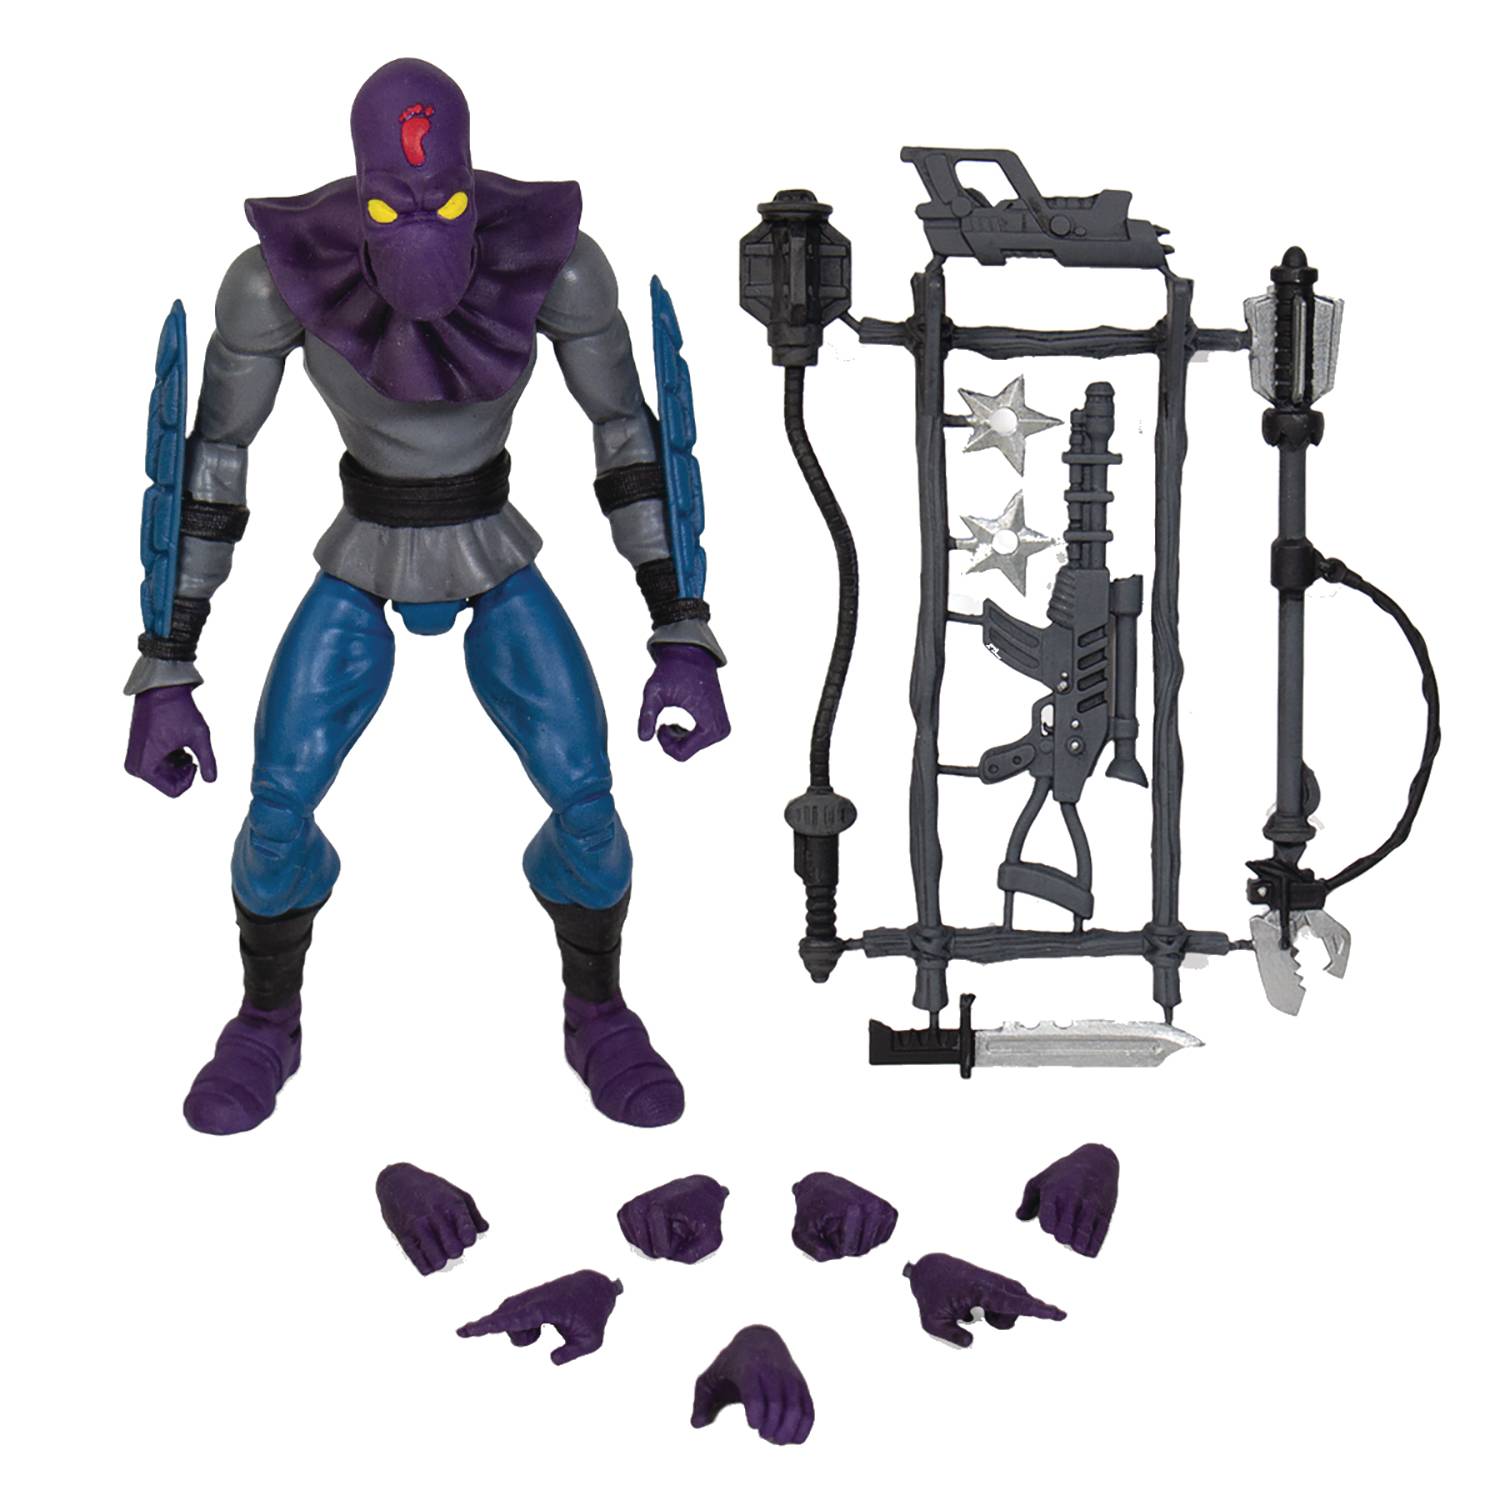 TMNT ULTIMATES WAVE 1 FOOT SOLDIER ACTION FIGURE